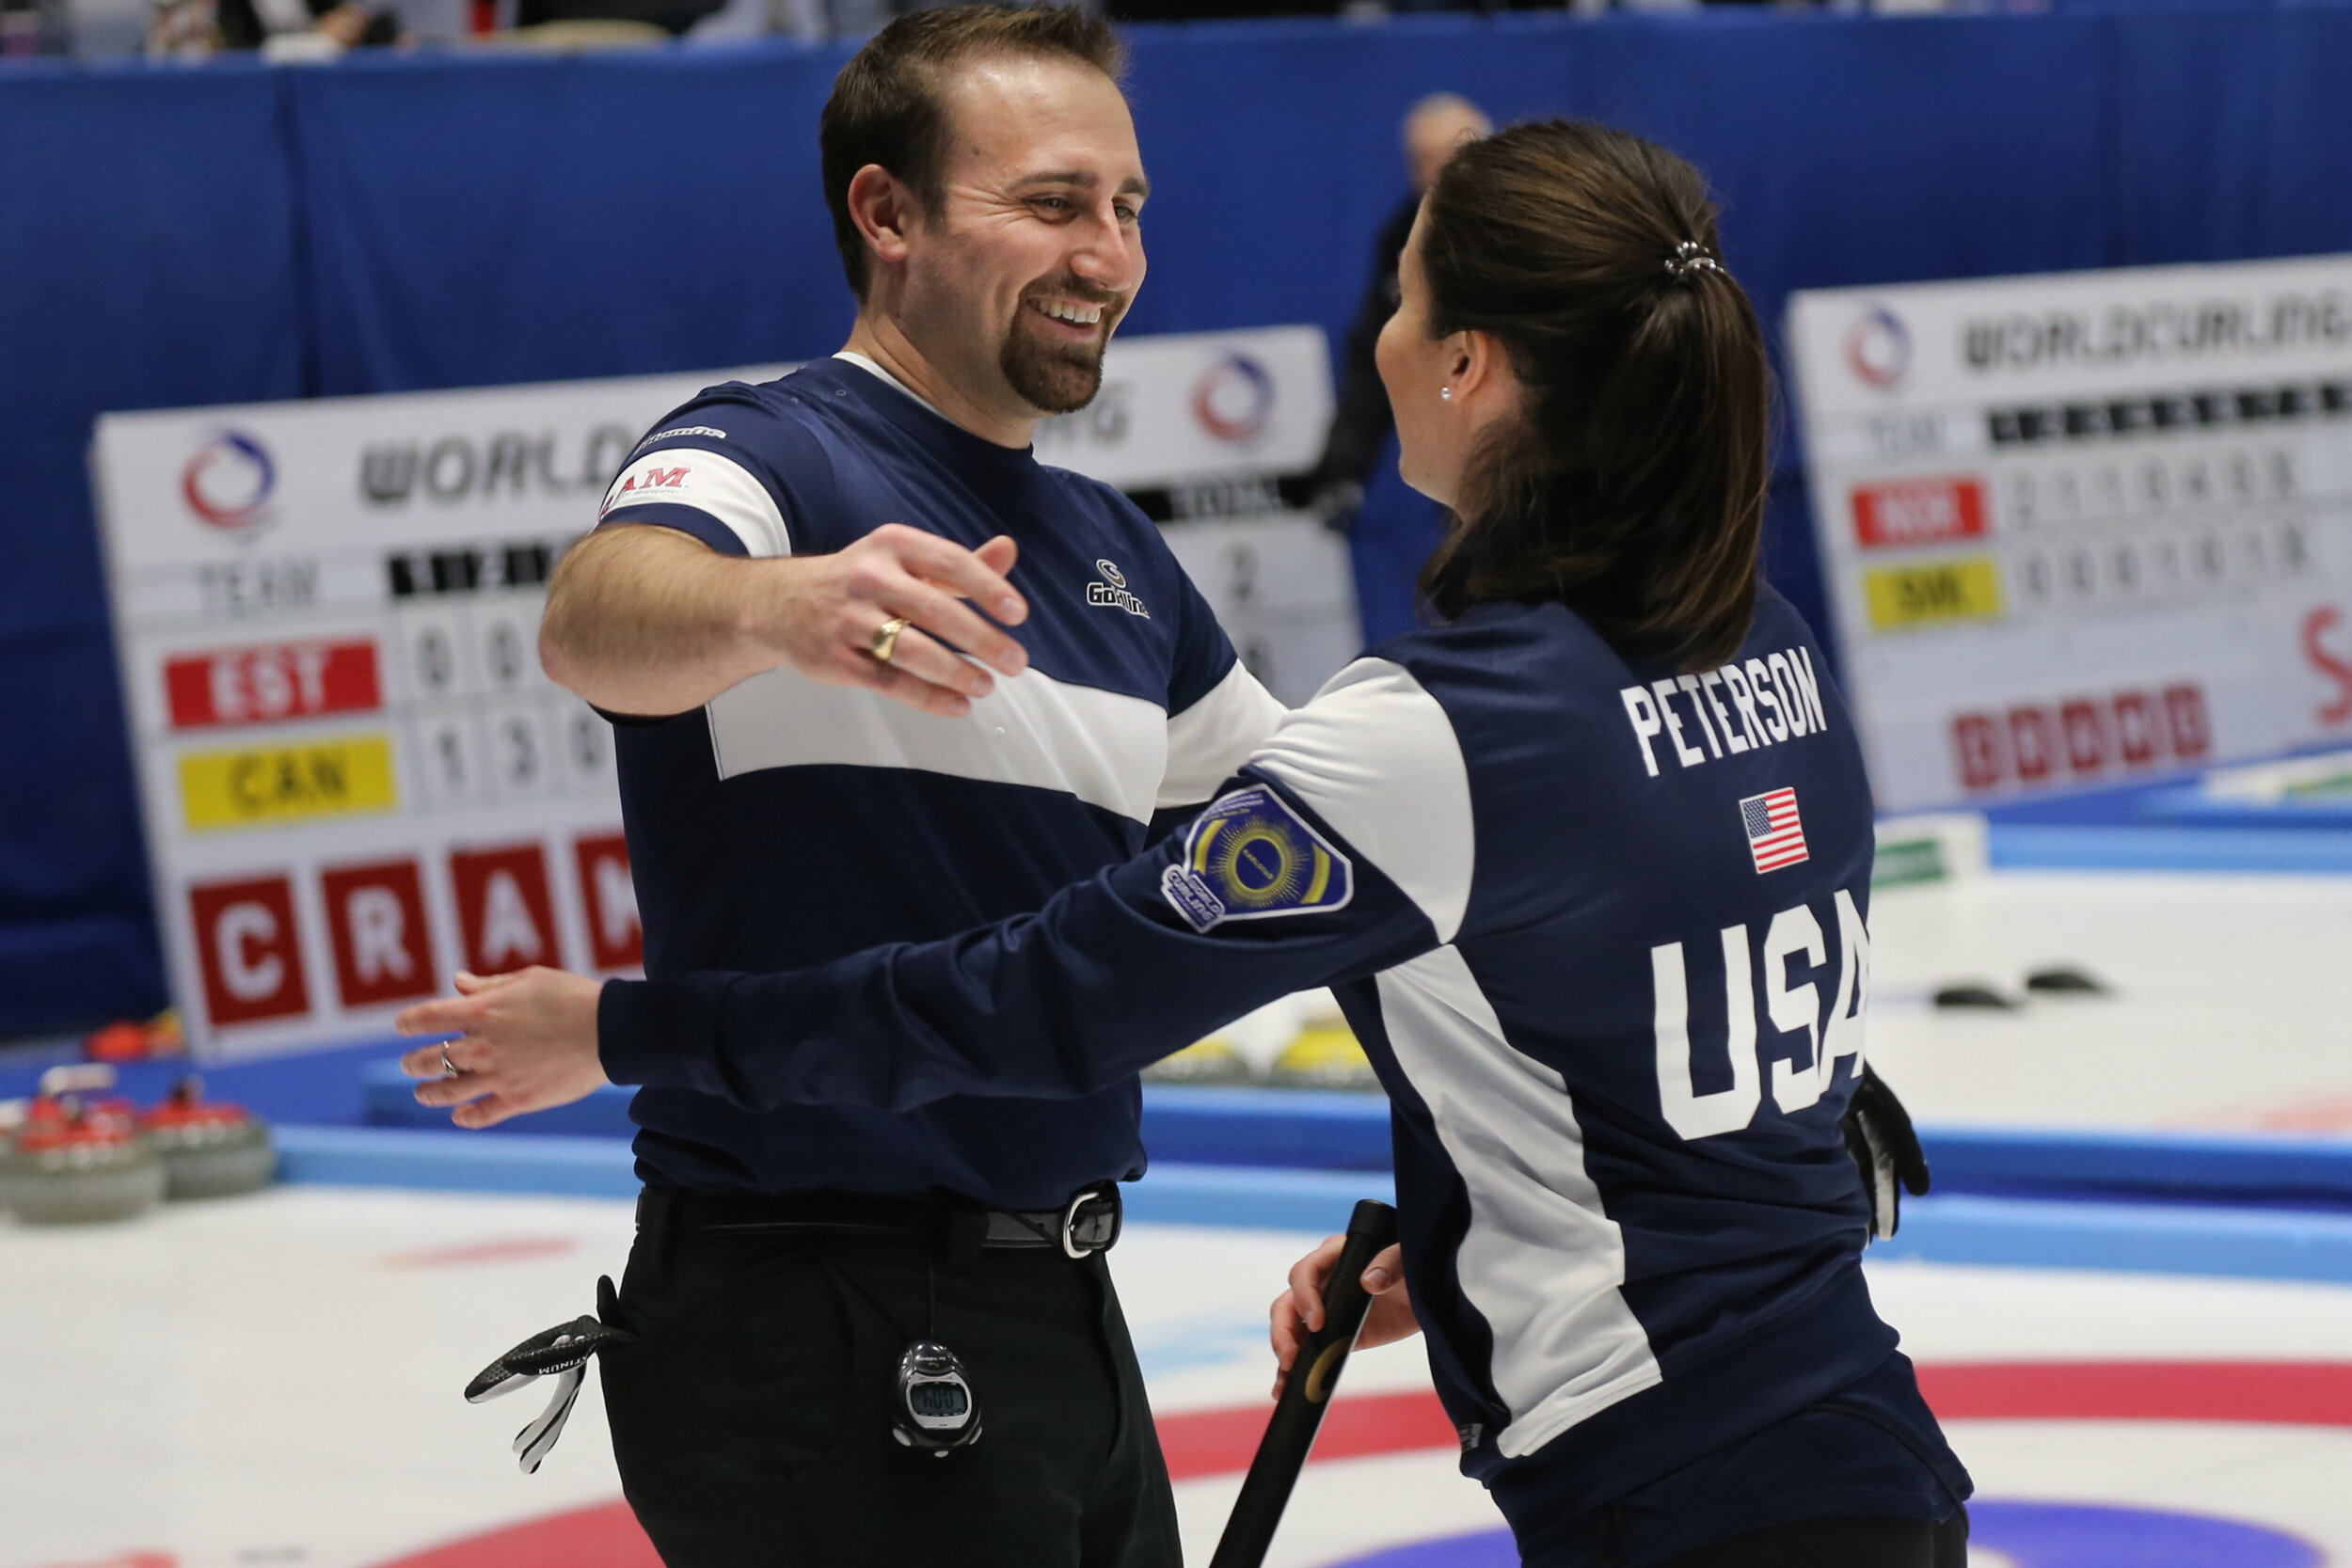 2021 WORLD MIXED DOUBLES CURLING CHAMPIONSHIP BEGINS MONDAY — USA CURLING